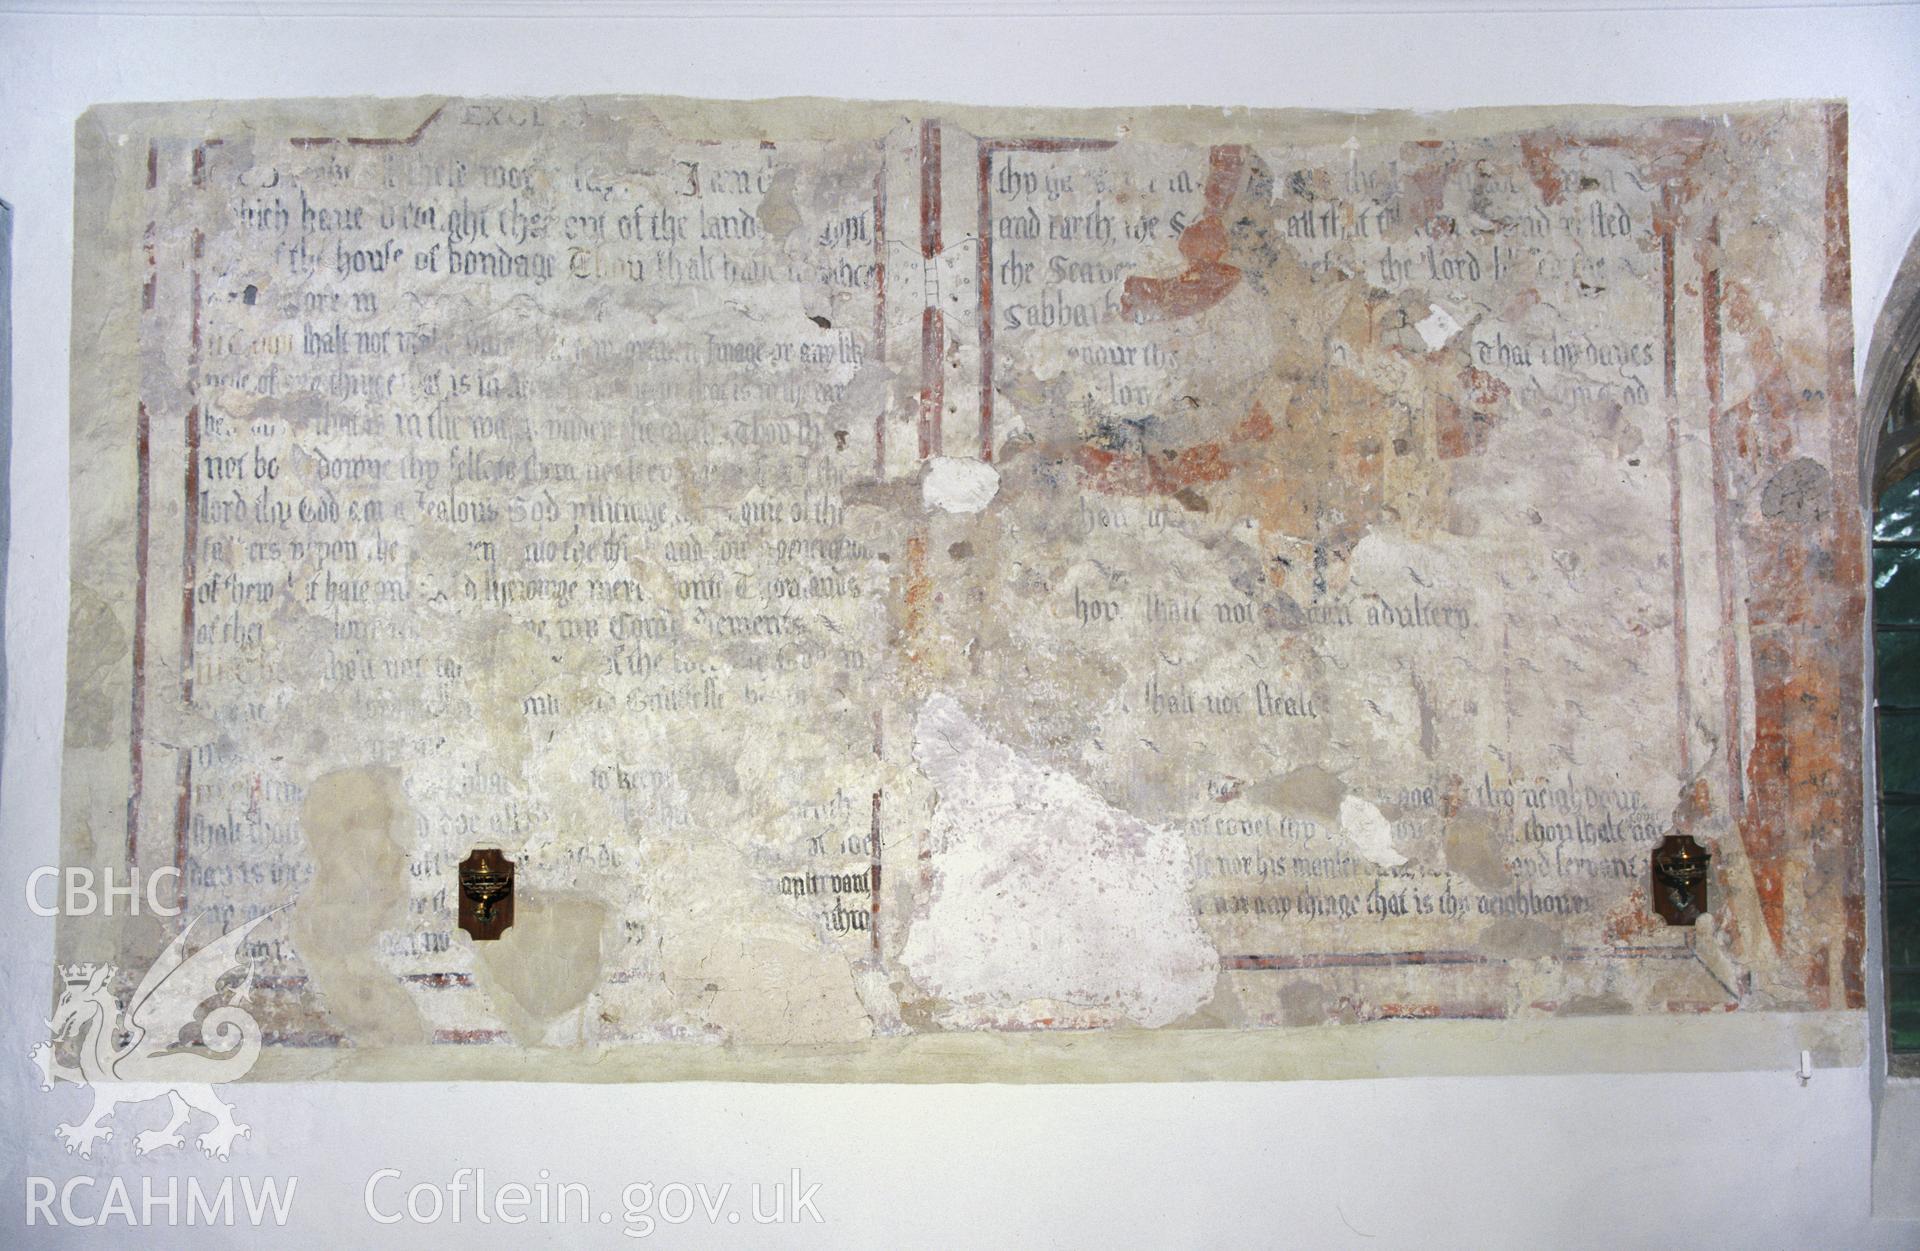 RCAHMW colour transparency of wallpainting in St Cybis Church, Llangybi, taken by RCAHMW